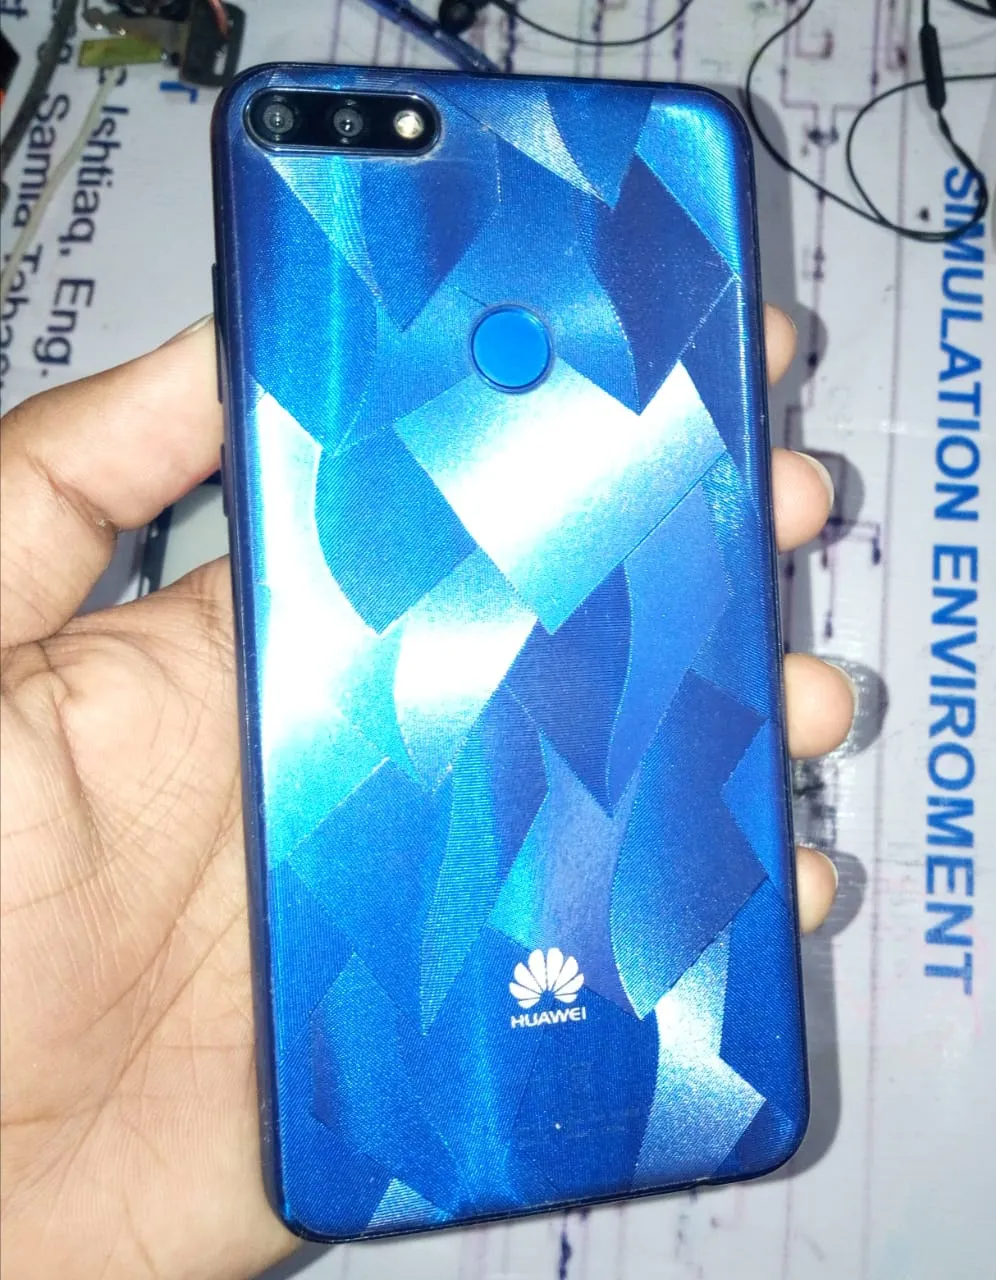 Huawei Y7 Prime 2018 (6 months Official warranty) - photo 2